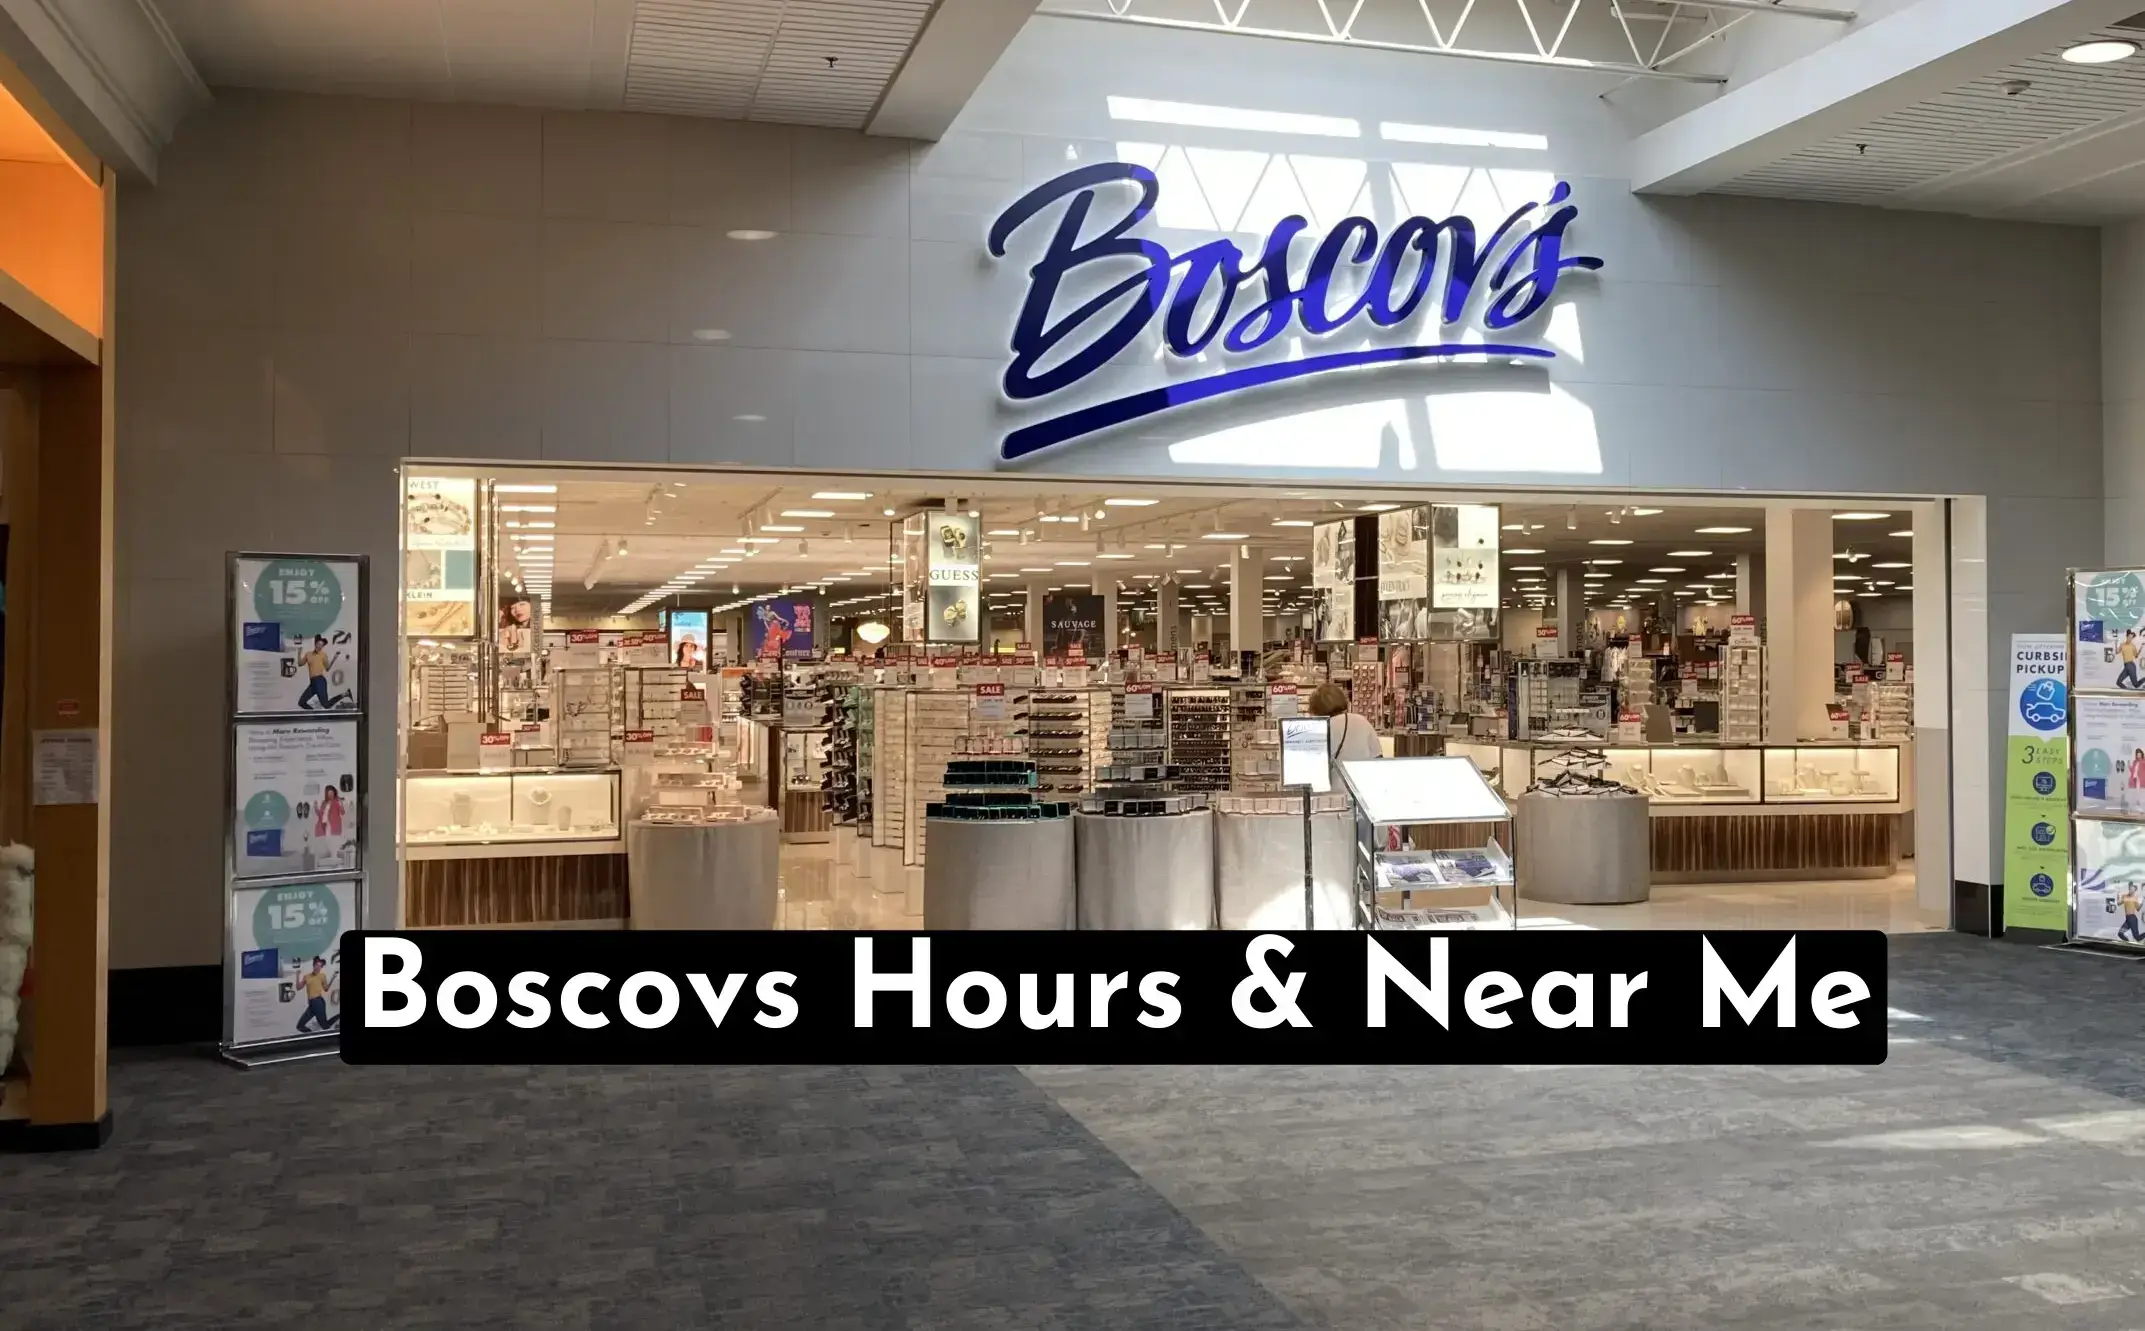 Discover Verified Boscovs Hours & Boscov's Near Me Locations| Shop For Fashion, Home Goods & More At Boscov's! | Find Your Nearest Store Now.